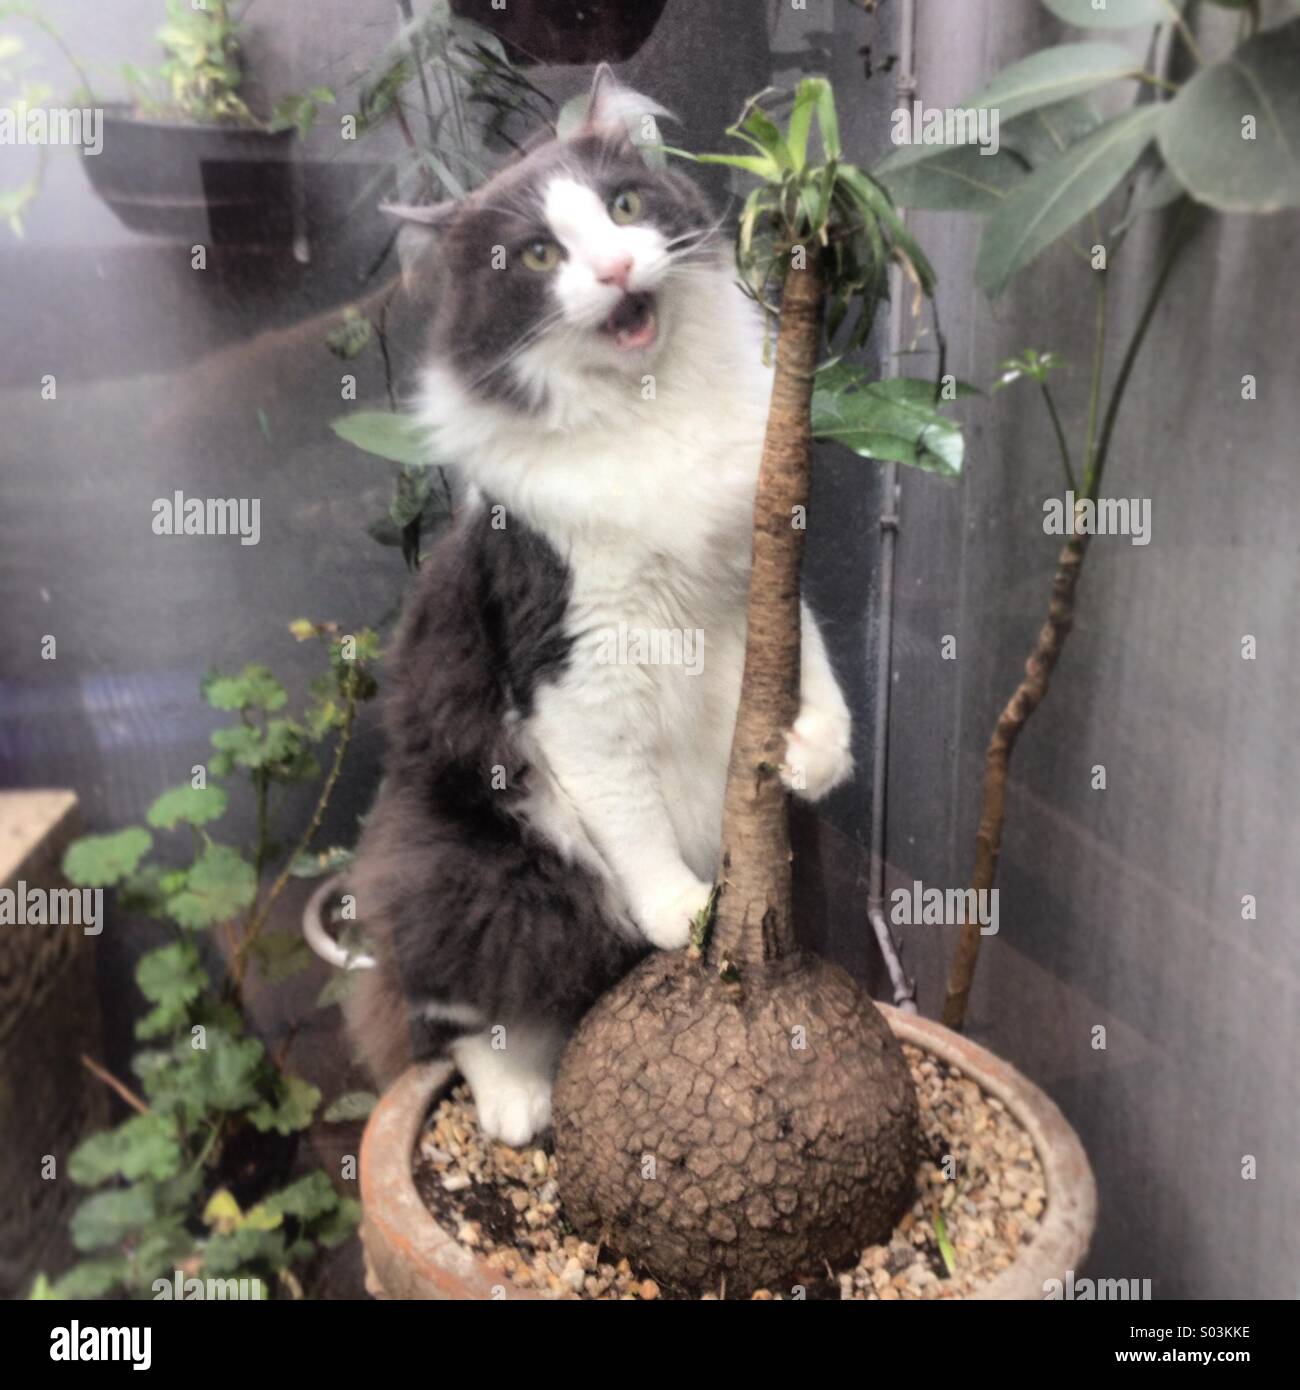 A cat appears to be singing as he holds a plant in a home garden in Colonia Roma, Mexico City, Mexico Stock Photo